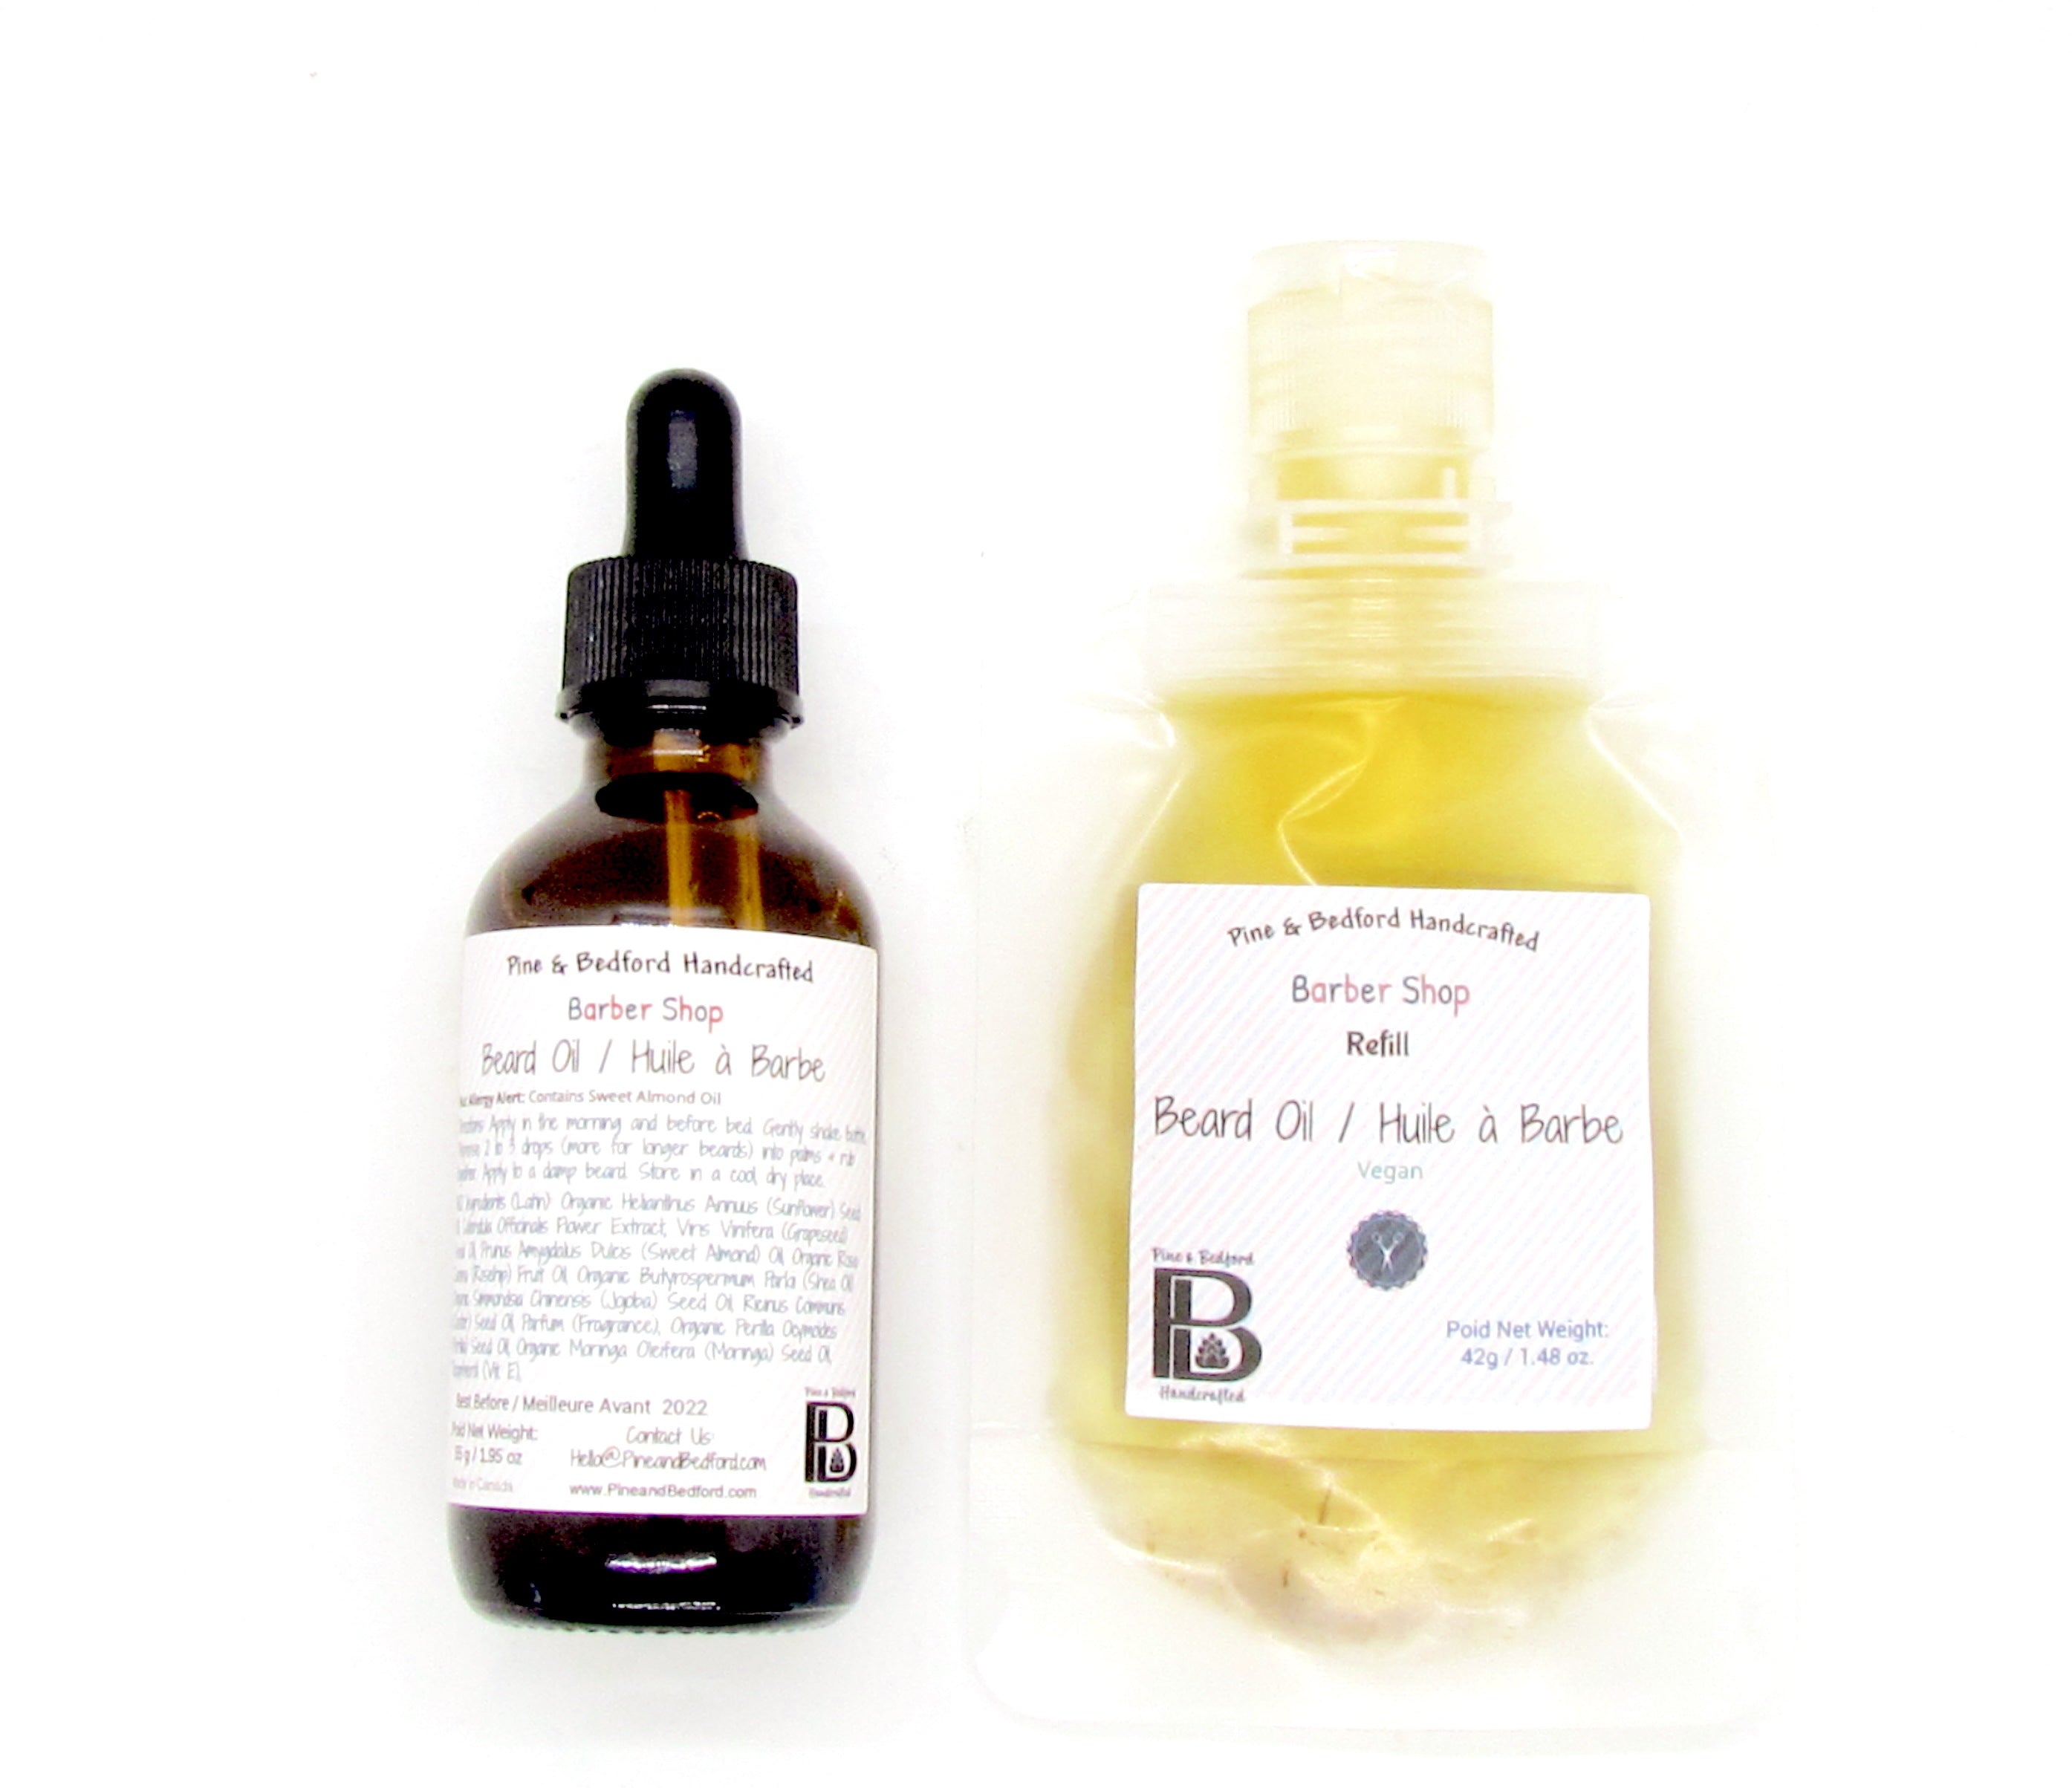 Pine and Bedford's Beard Oil is made from Organic Calendula infused Sunflower Oil, Grapeseed Oil, Sweet Almond Oil, Rosehip Oil, Shea Oil, Jojoba Oil,  Castor OIl, Perila Oil, Moringa Oil, and  Vitamin E. It has a light, calming Barber Shop fragrance.  Shown here in a 2 oz dropper bottle with a net product weight of 55 g / 1.95 oz dropper bottle, and in a 42 g / 1.48 oz net weight Refill pack with nozzle. 